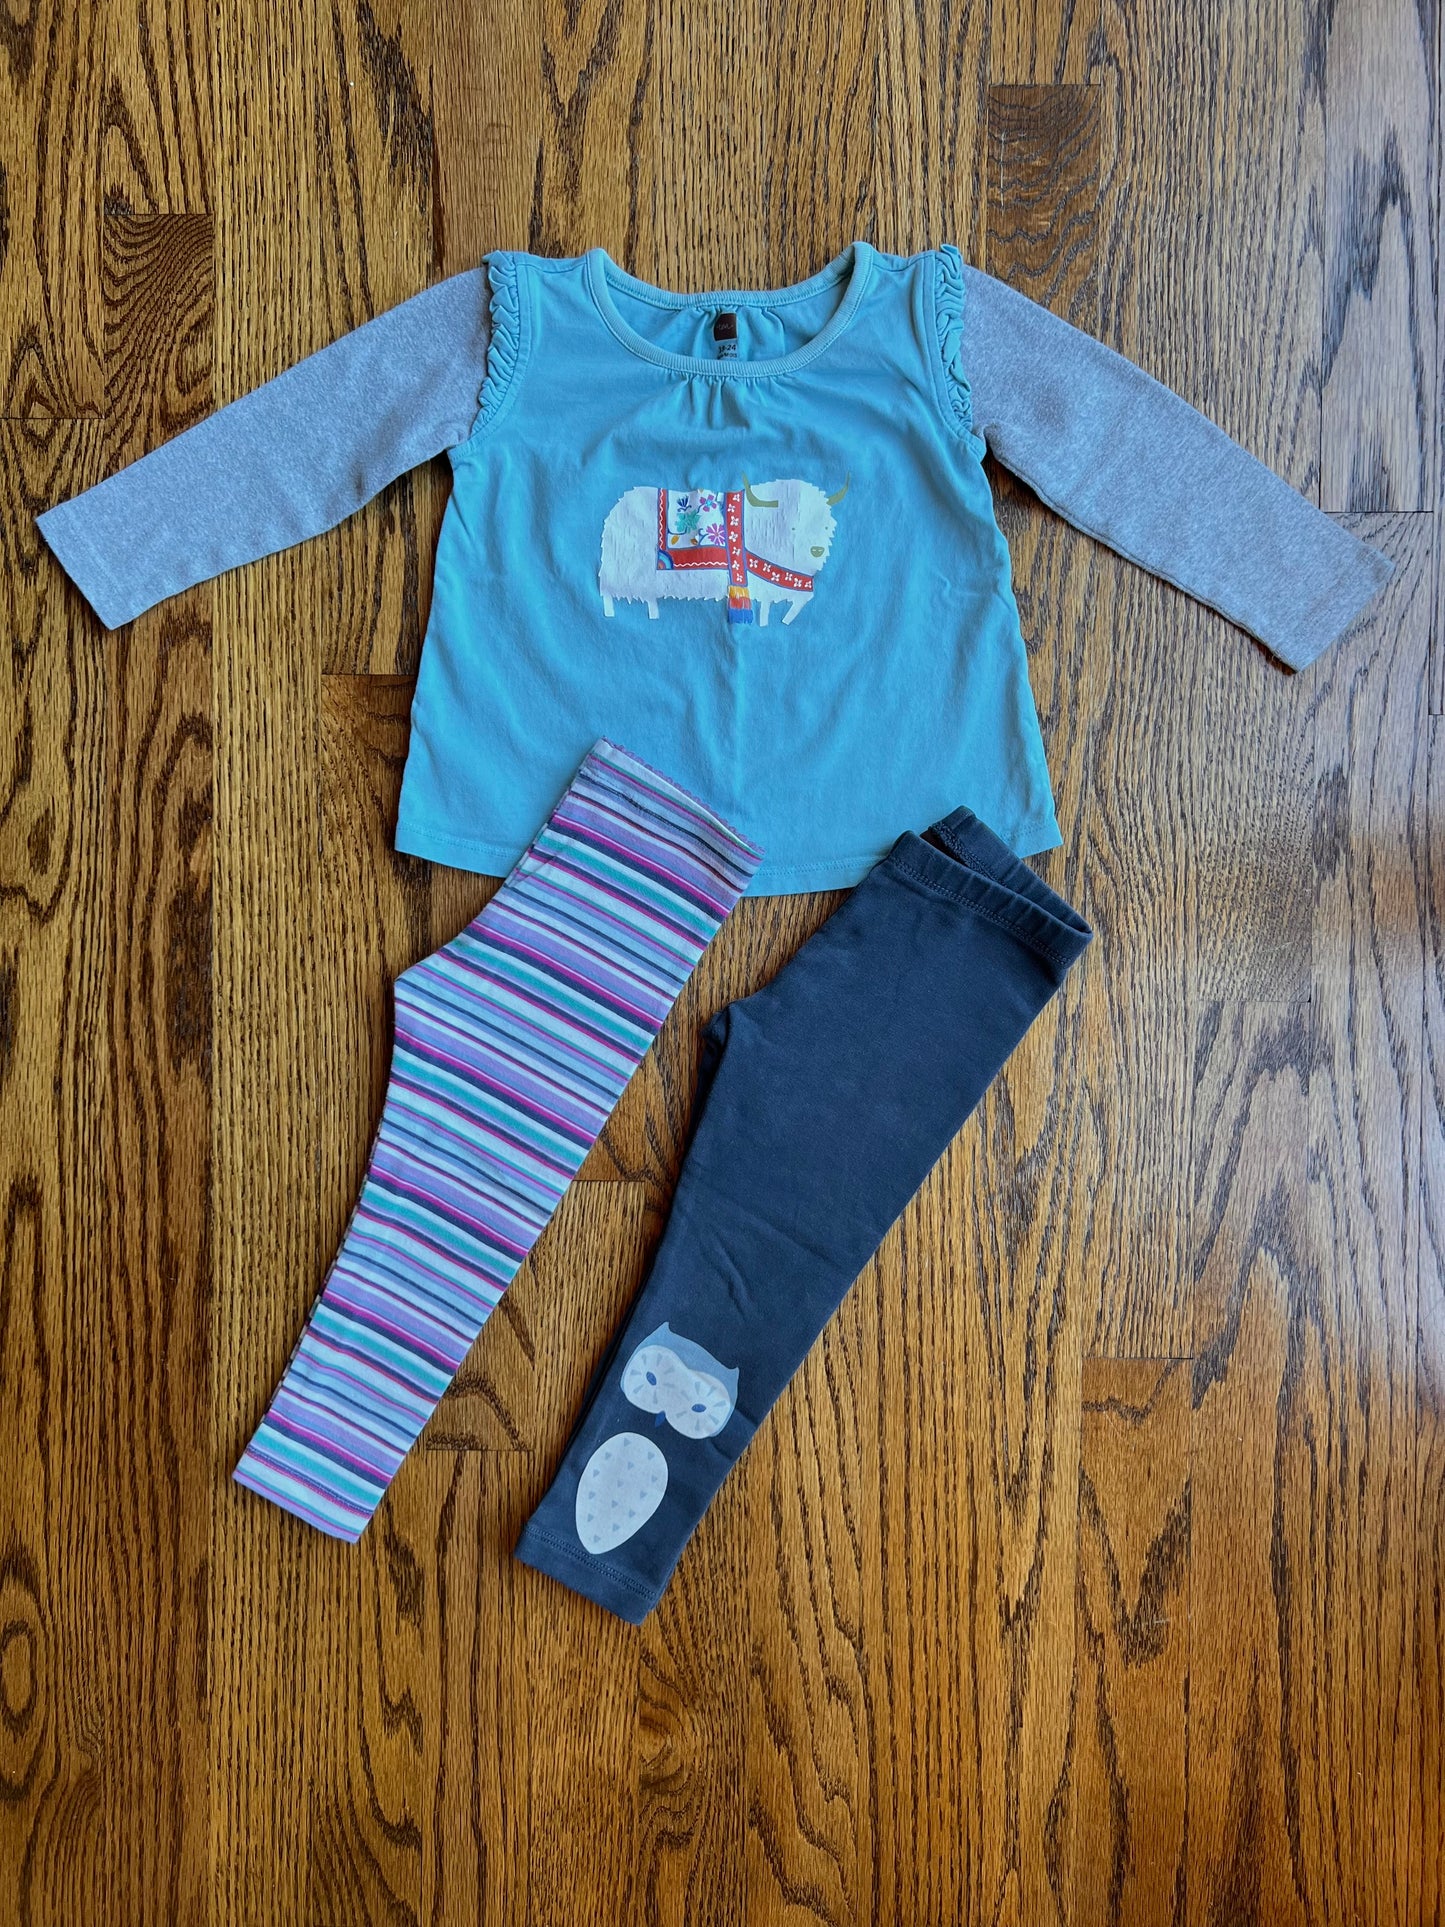 Tea Collection Baby Girl 24M Bundle, Top & 2 Pairs of Leggings (Navy Owl & Stripes)